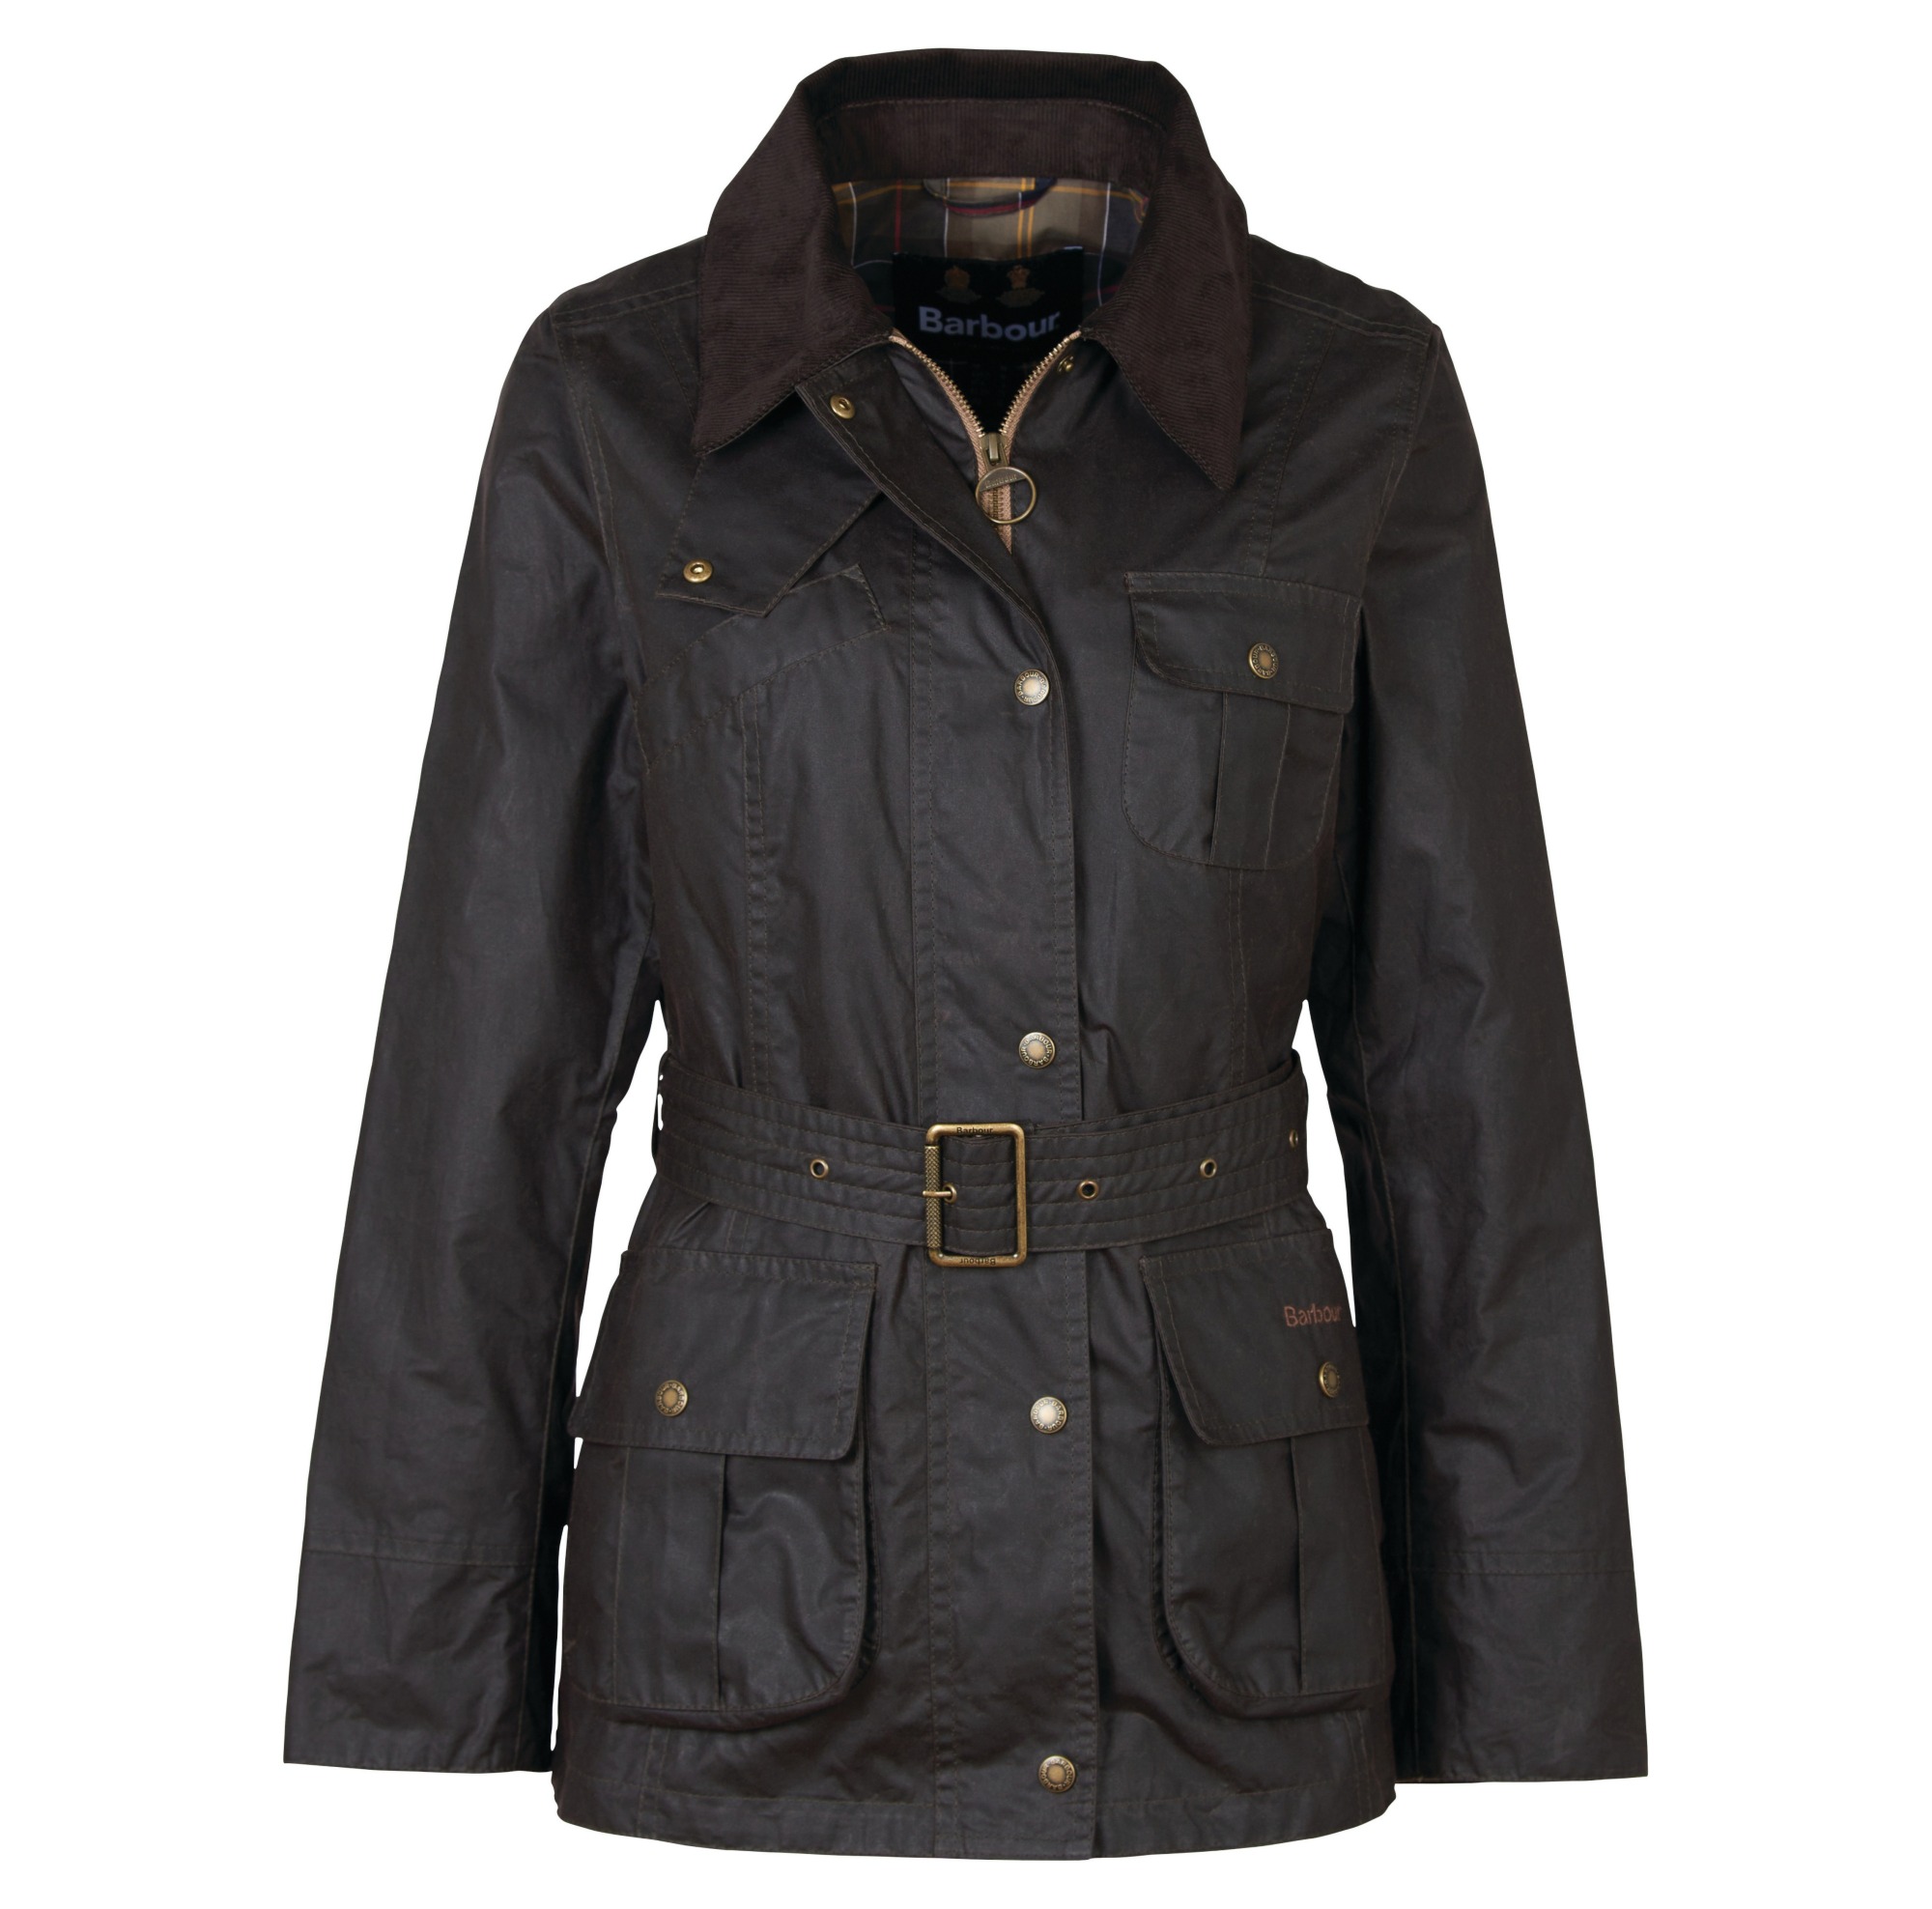 BARBOUR CAMERON WAX Jacket Womens 8 Belted Coat Waxed Cotton Lined Rustic  Brown £64.90 - PicClick UK